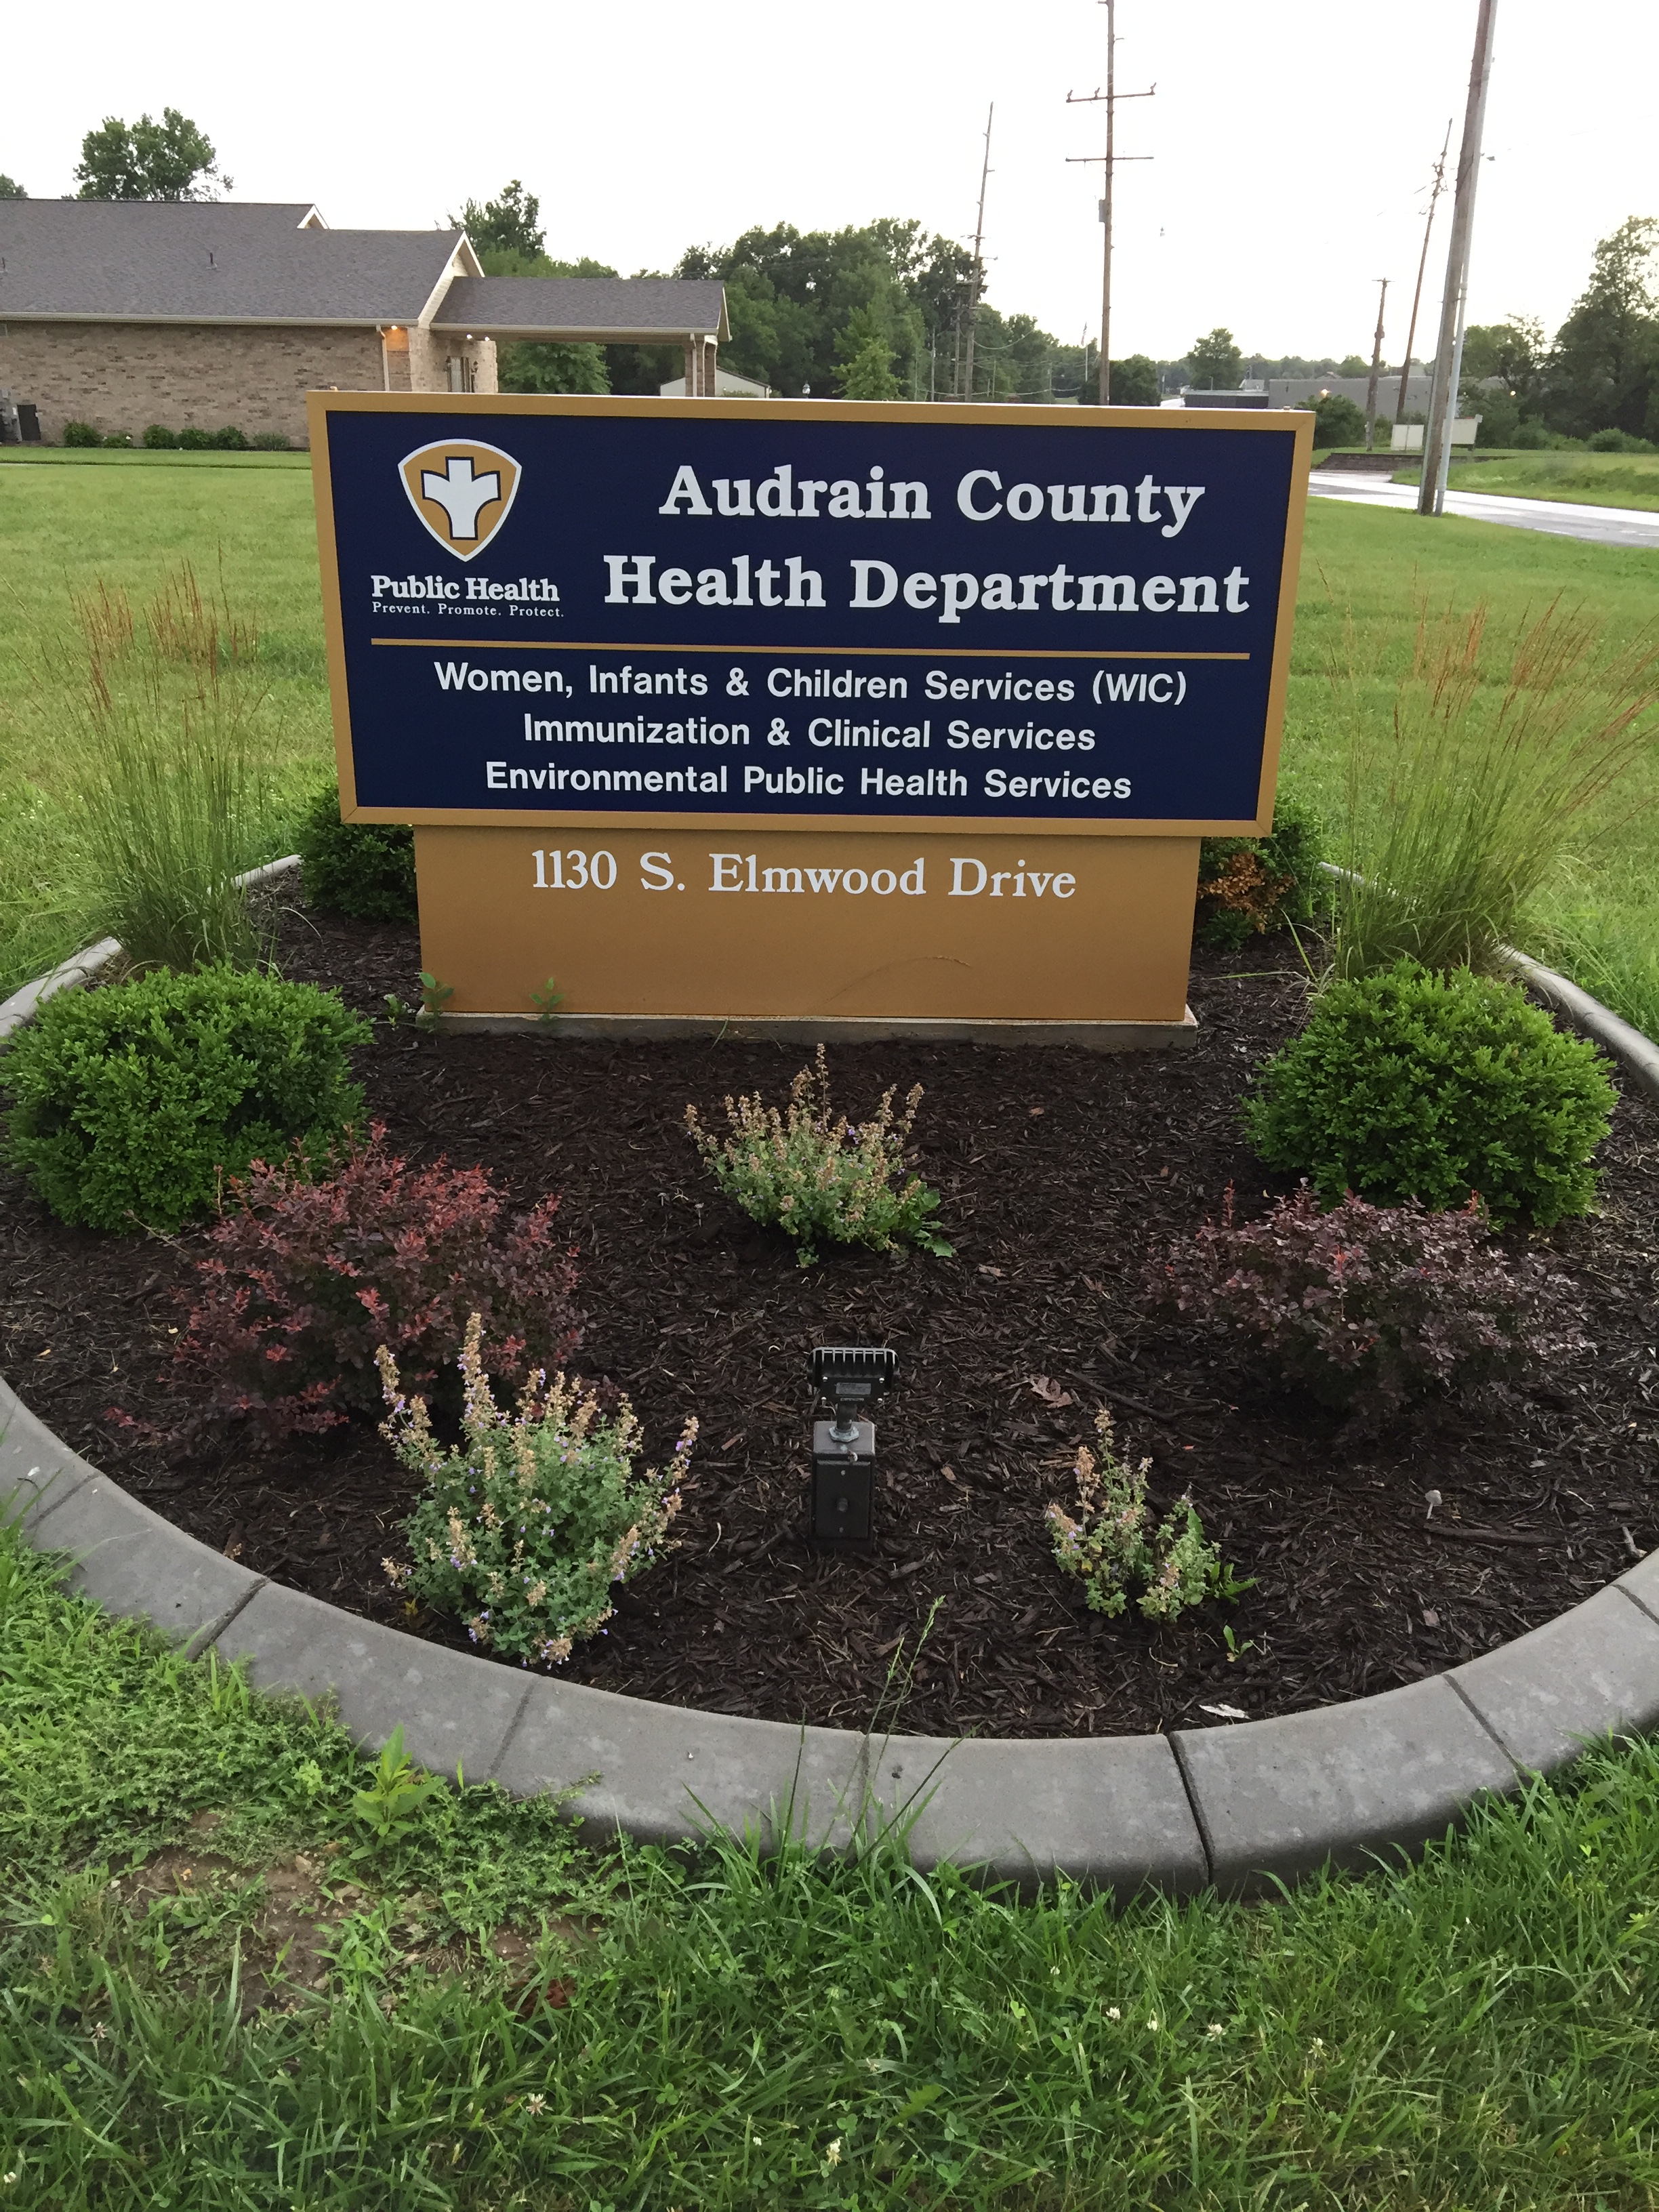 Audrain County Health Department Easing Requirements For Fans During Heat Advisory